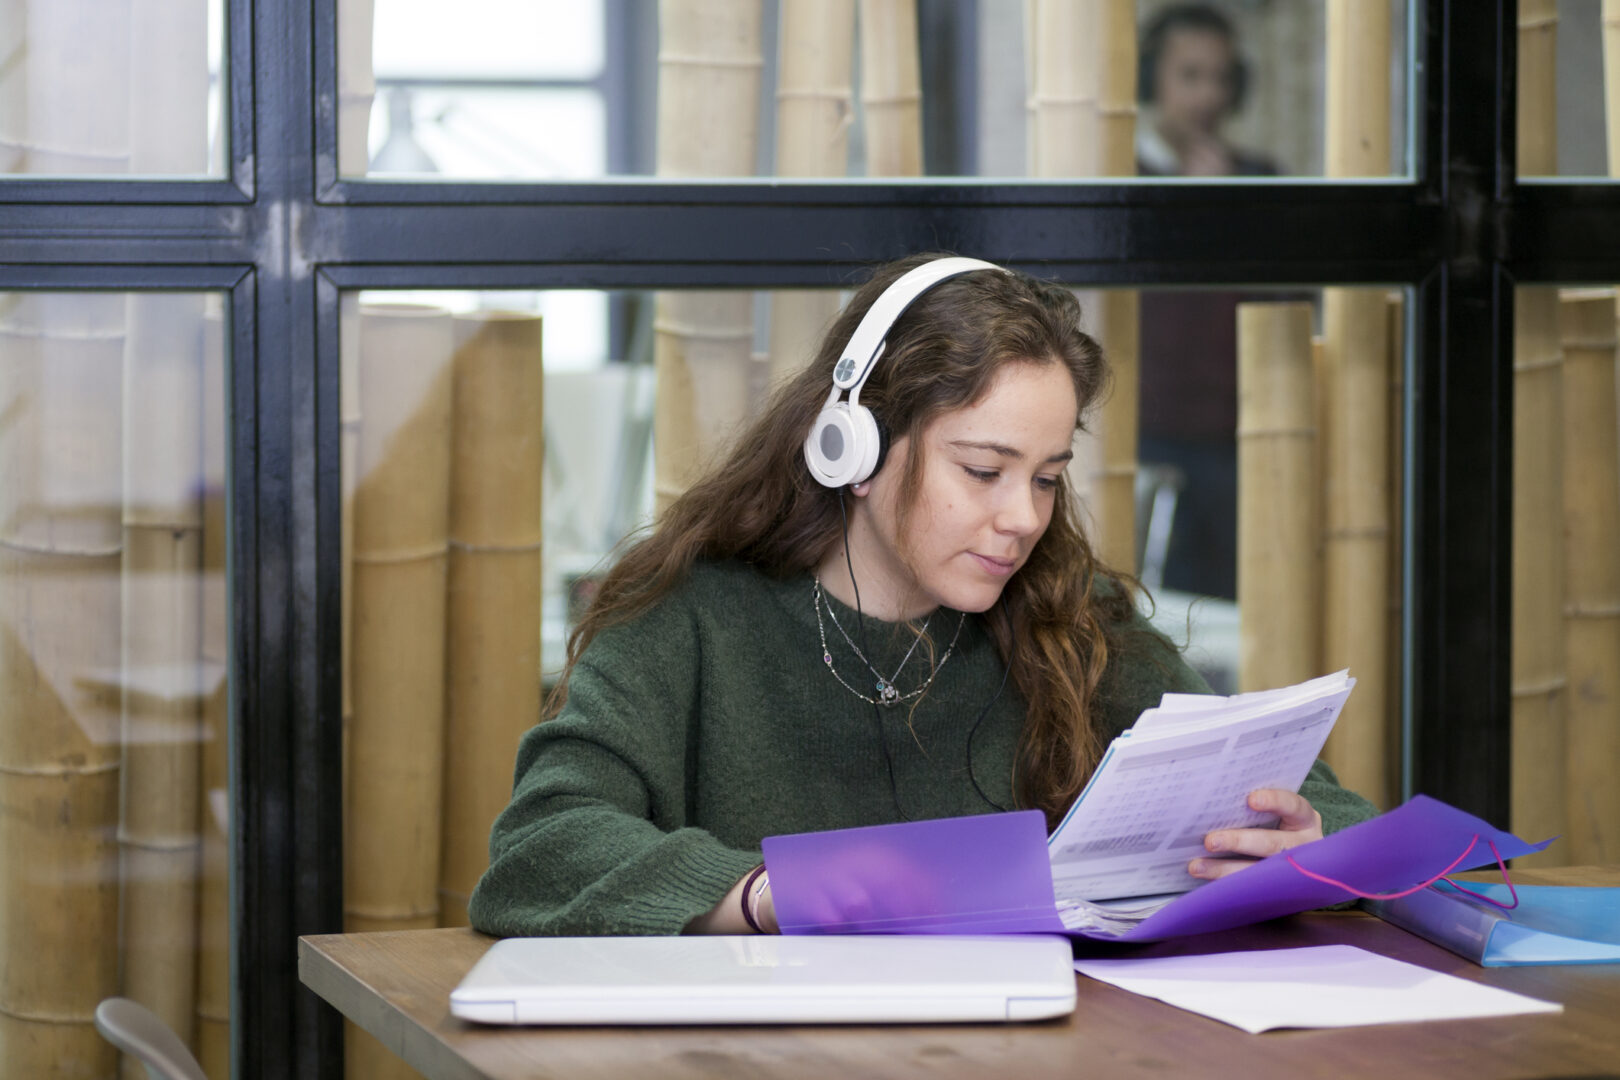 Students who listen to music while studying have a higher GPA: poll